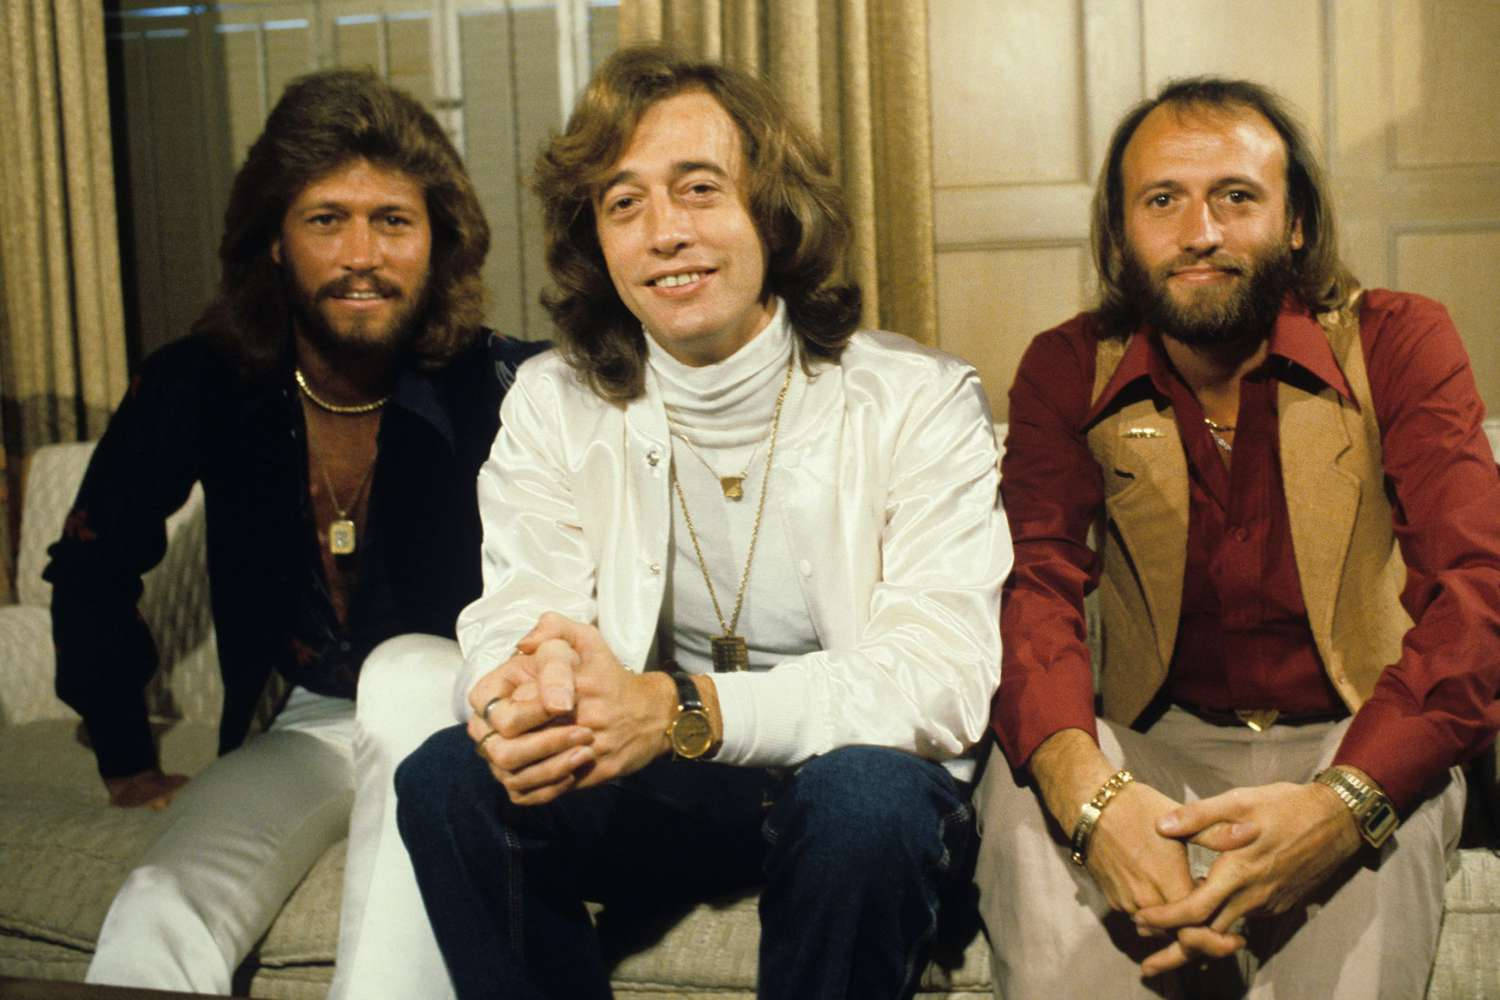 Bee Gees Popular Disco Band Portrait Picture